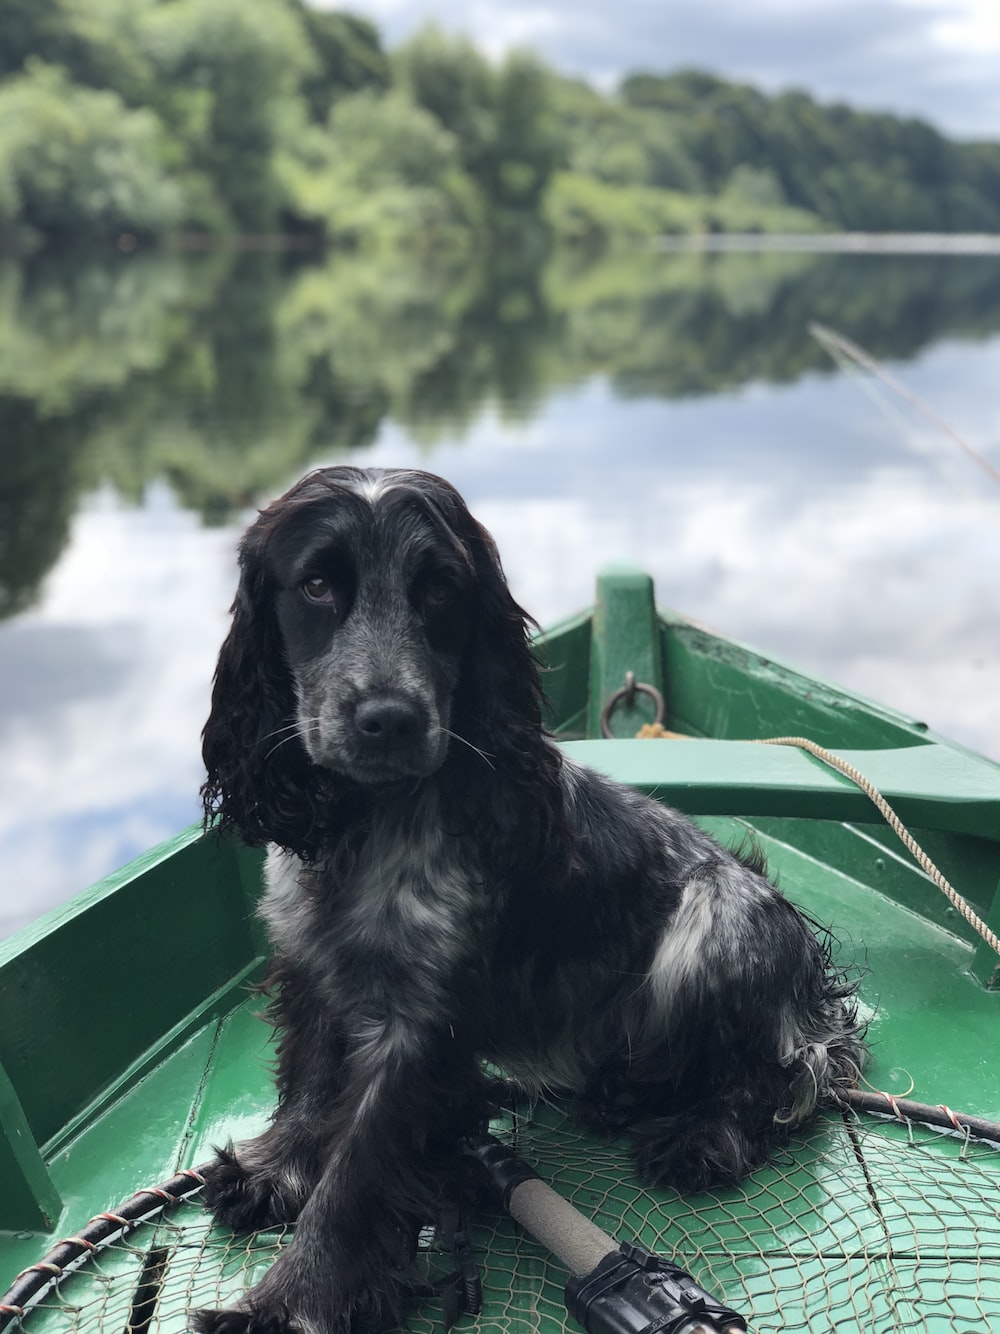 black dog sitting on boat on body of water